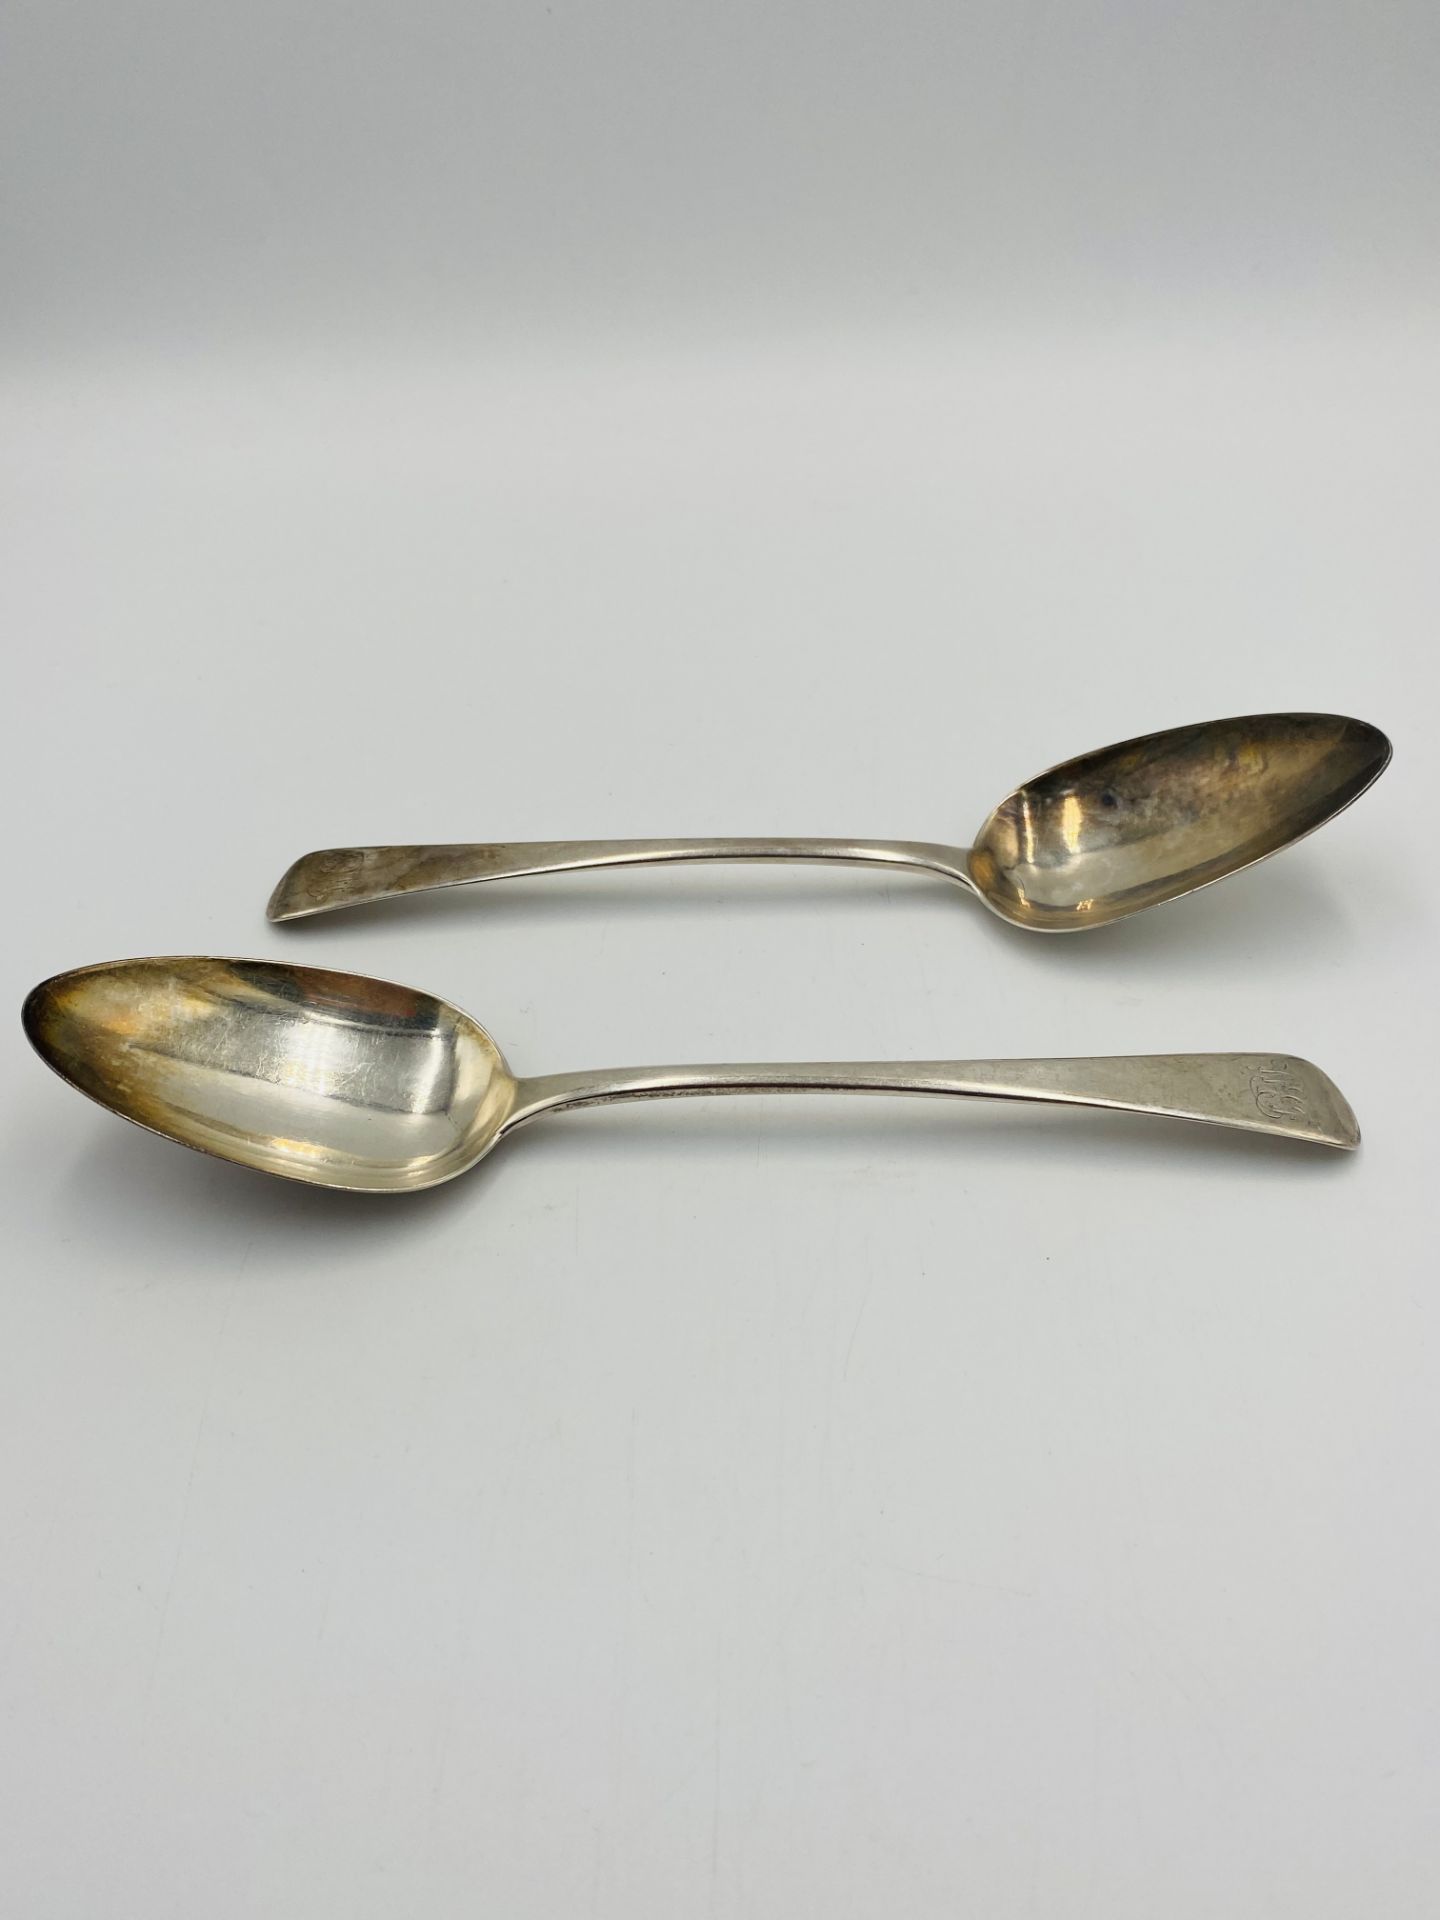 Pair of silver serving spoons - Image 3 of 6